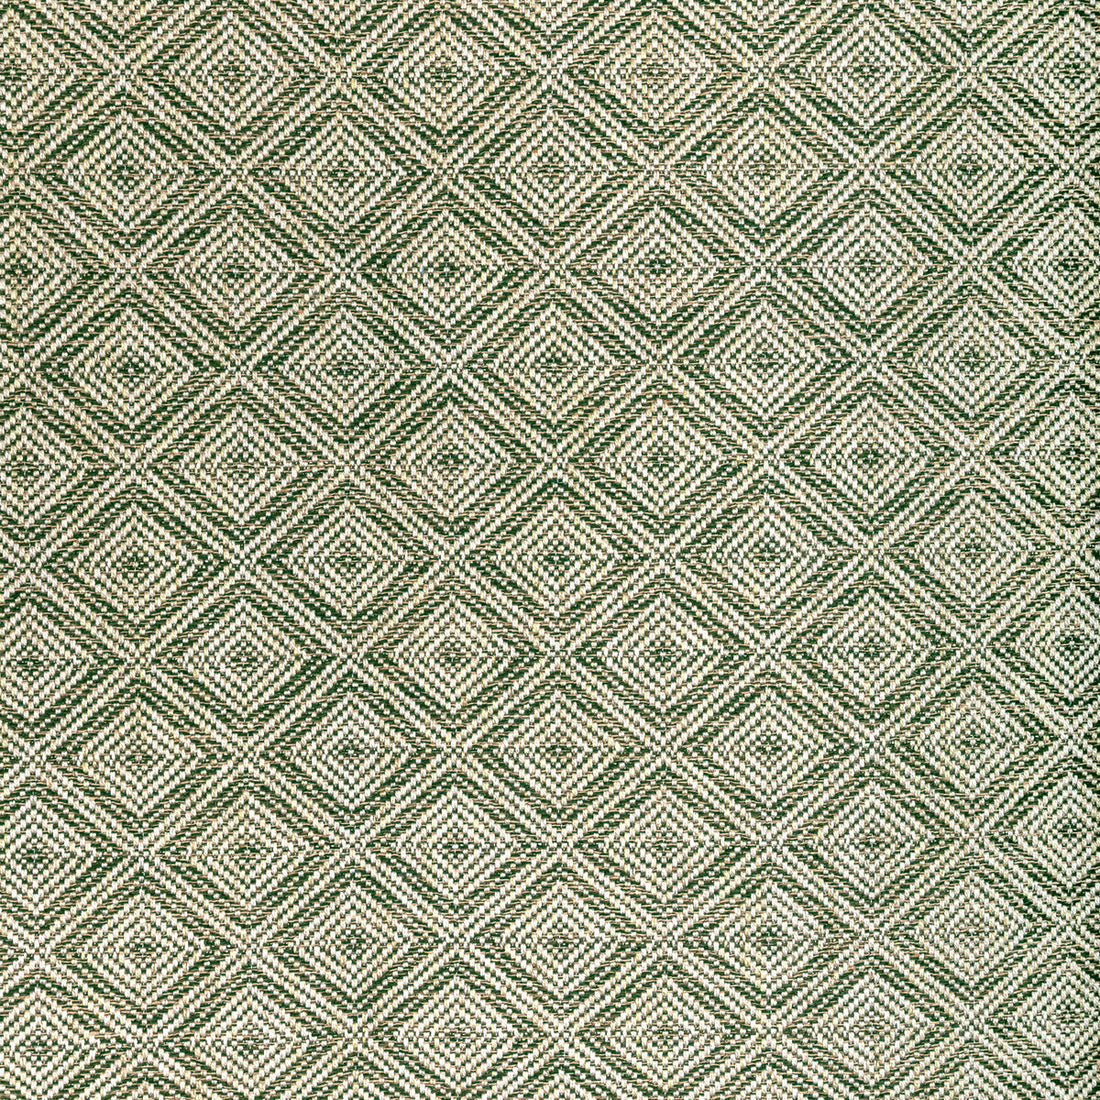 Calvin Weave fabric in green color - pattern 8022114.33.0 - by Brunschwig &amp; Fils in the Lorient Weaves collection